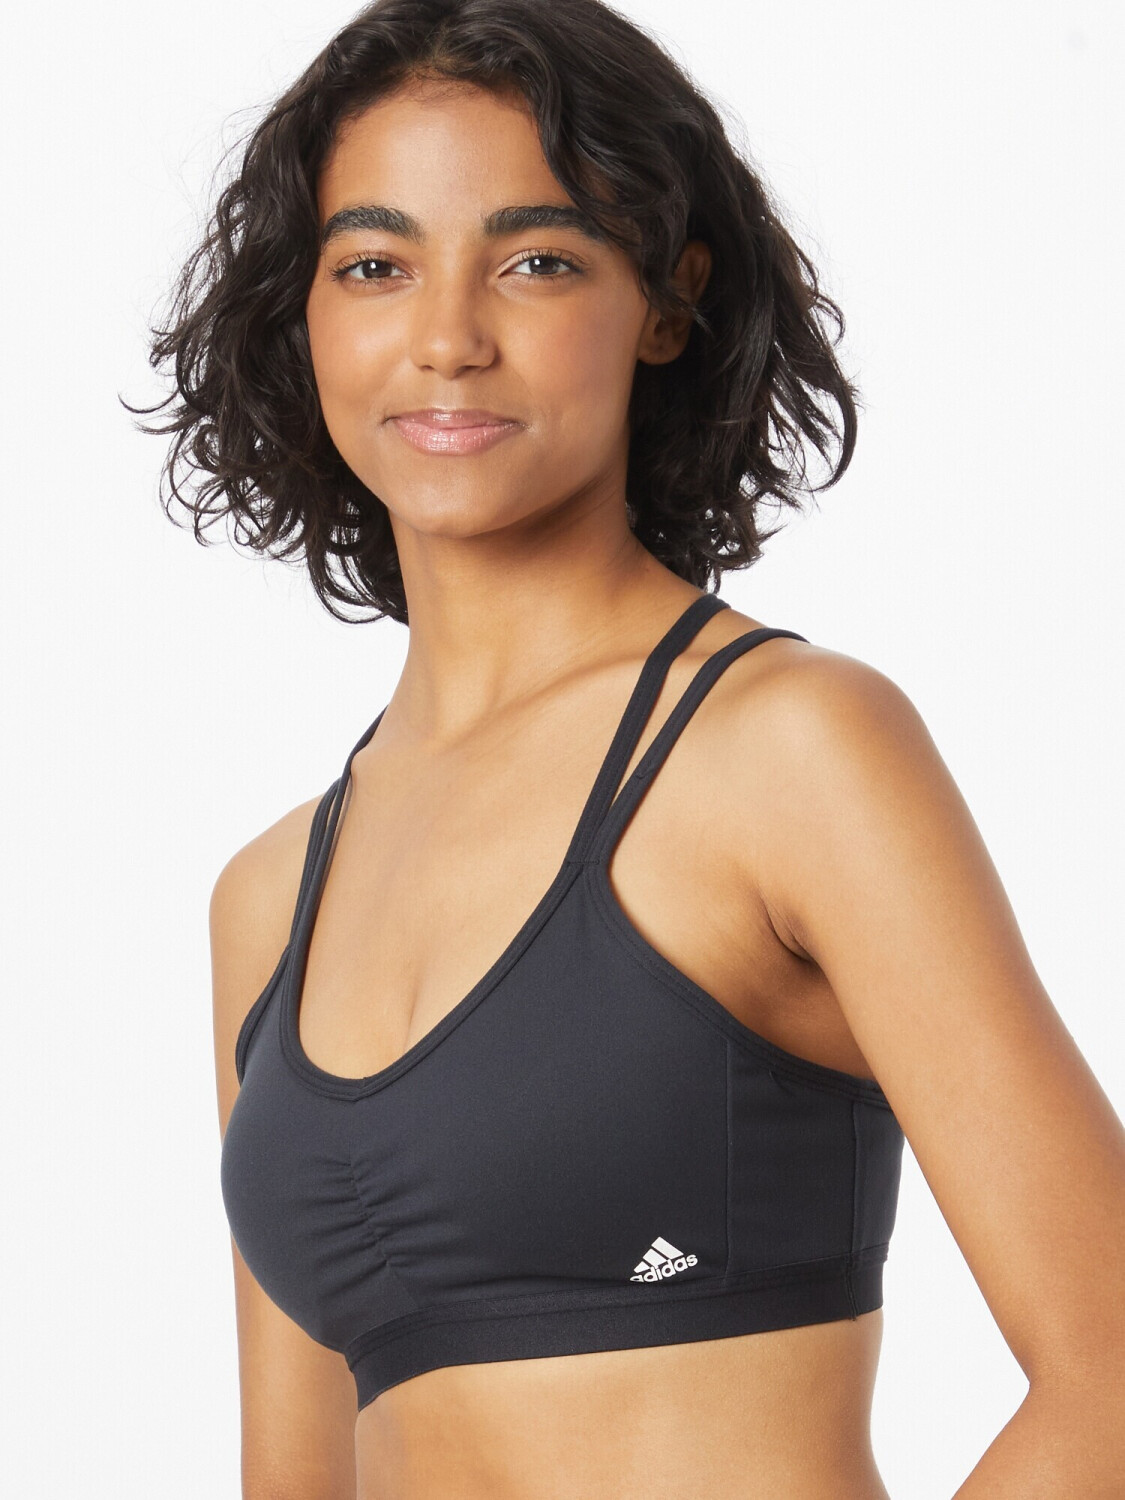 – Buy Light-Support bra black from (HE9060) on £9.60 sports Essentials Best Adidas Yoga (Today) Deals